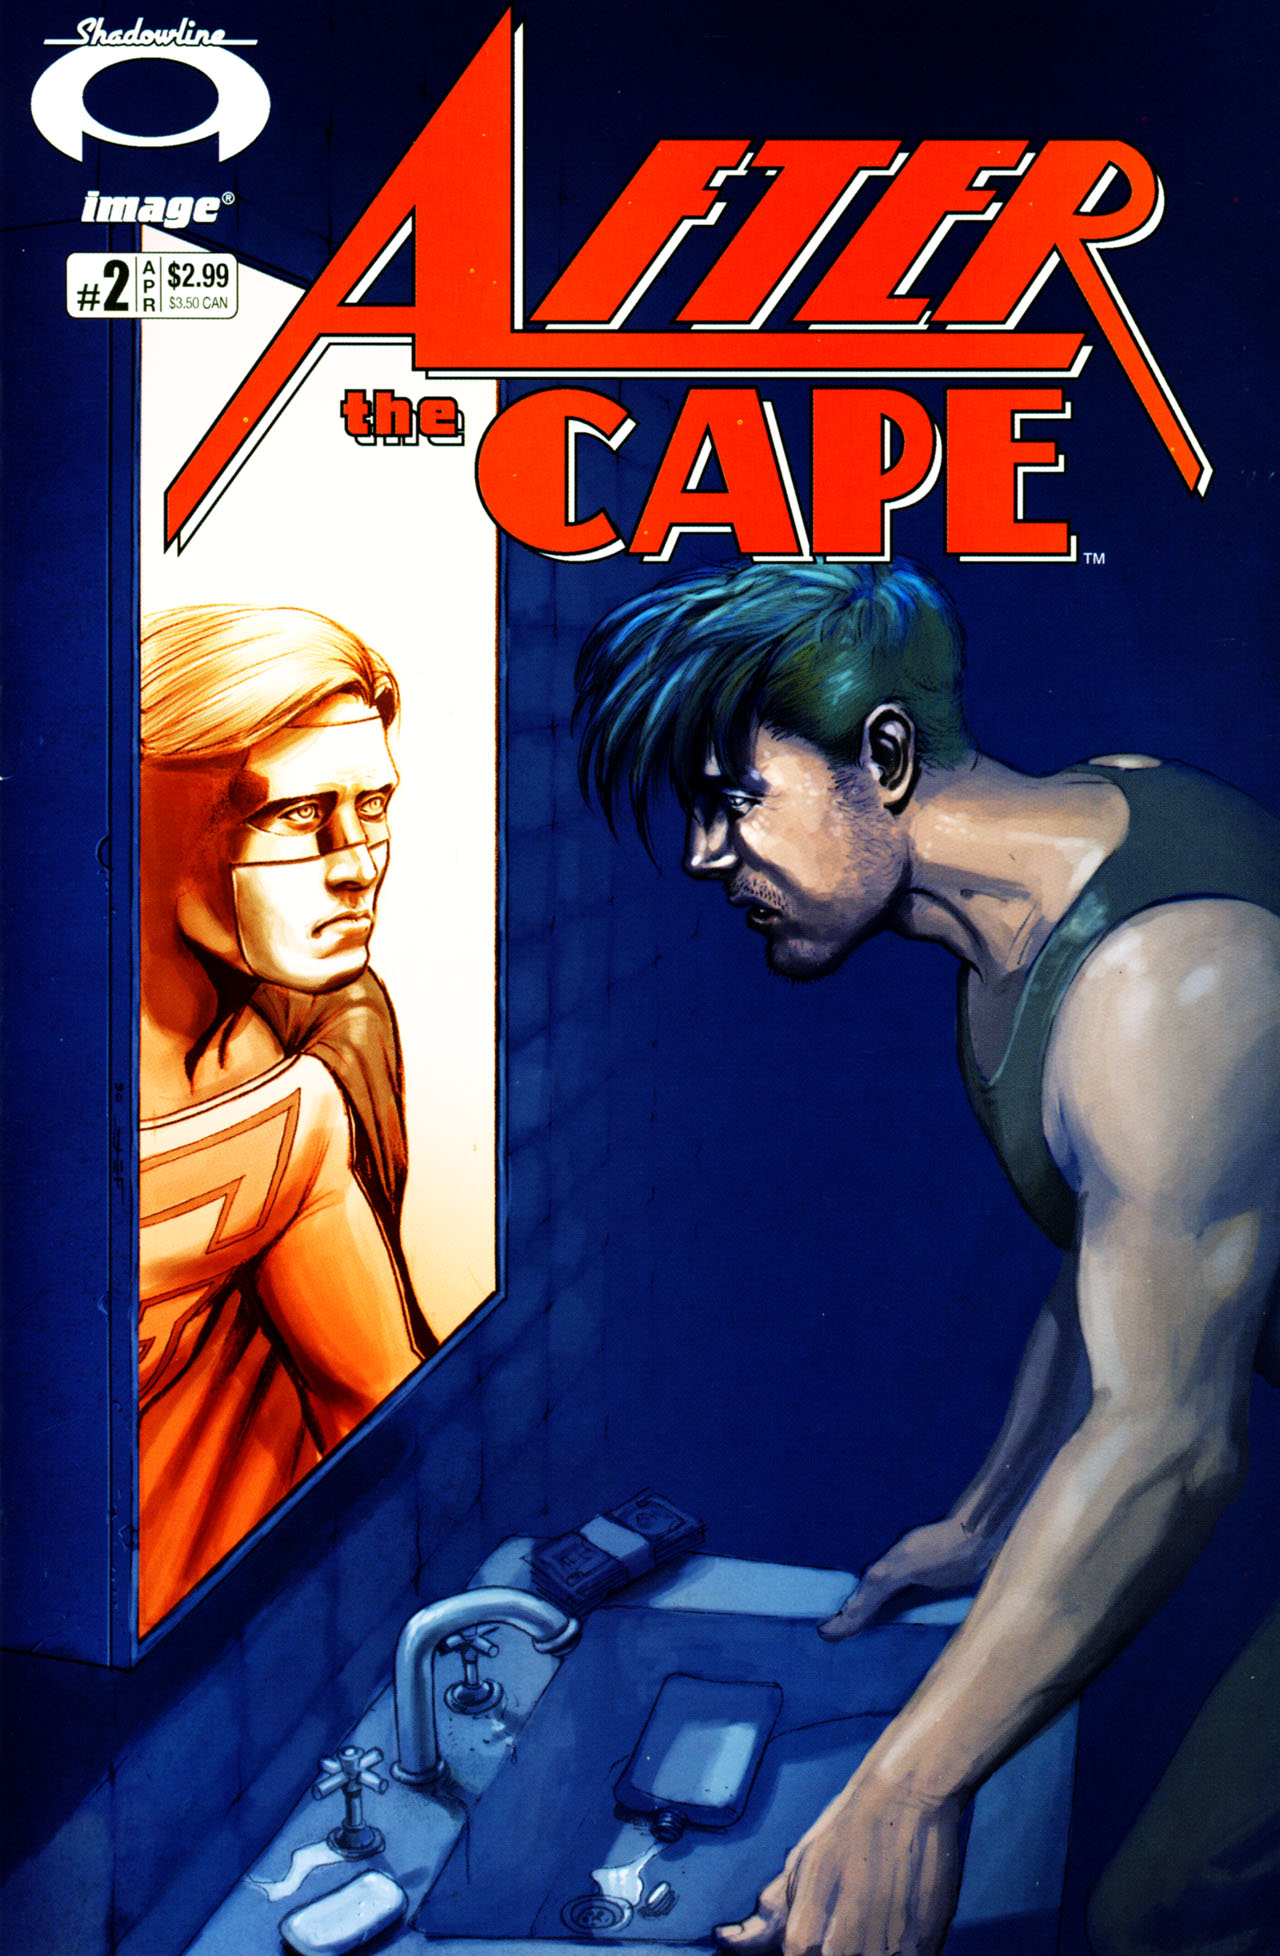 After The Cape - Issue 2: Secret Life